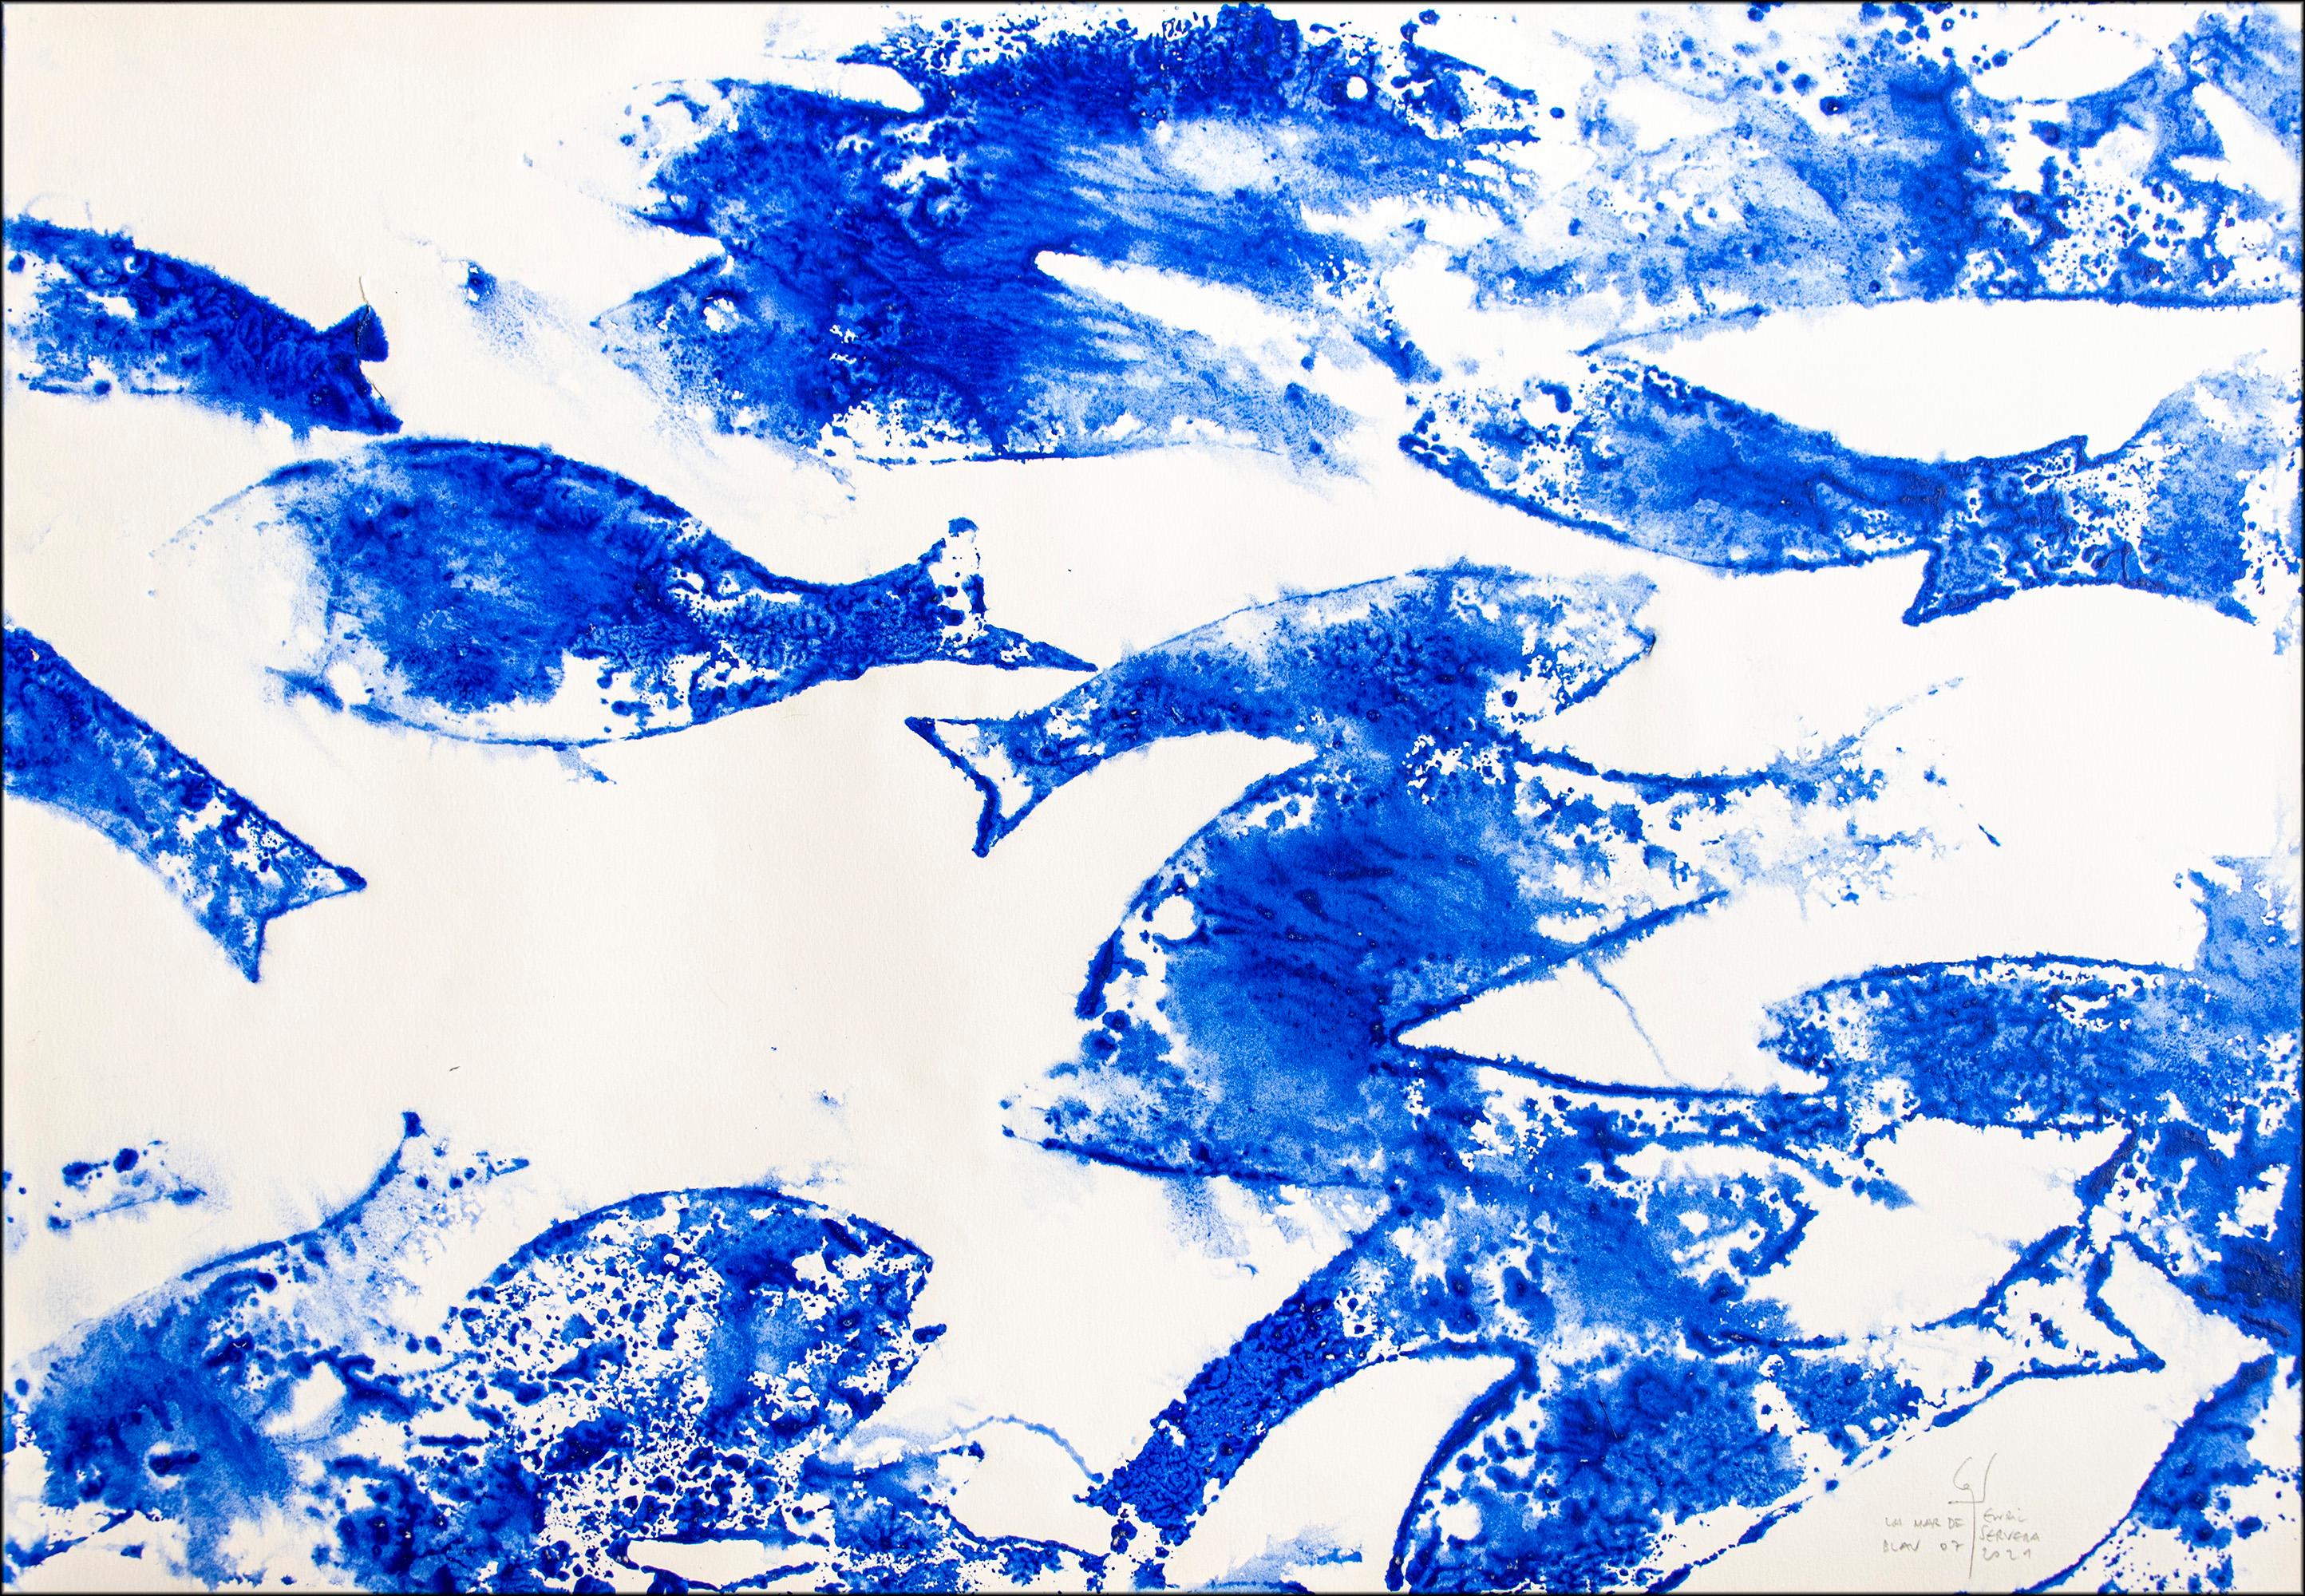 Enric Servera Abstract Painting - Sea of Blues N7, Abstract Blue and White Fish Patterns, Mediterranean Style 